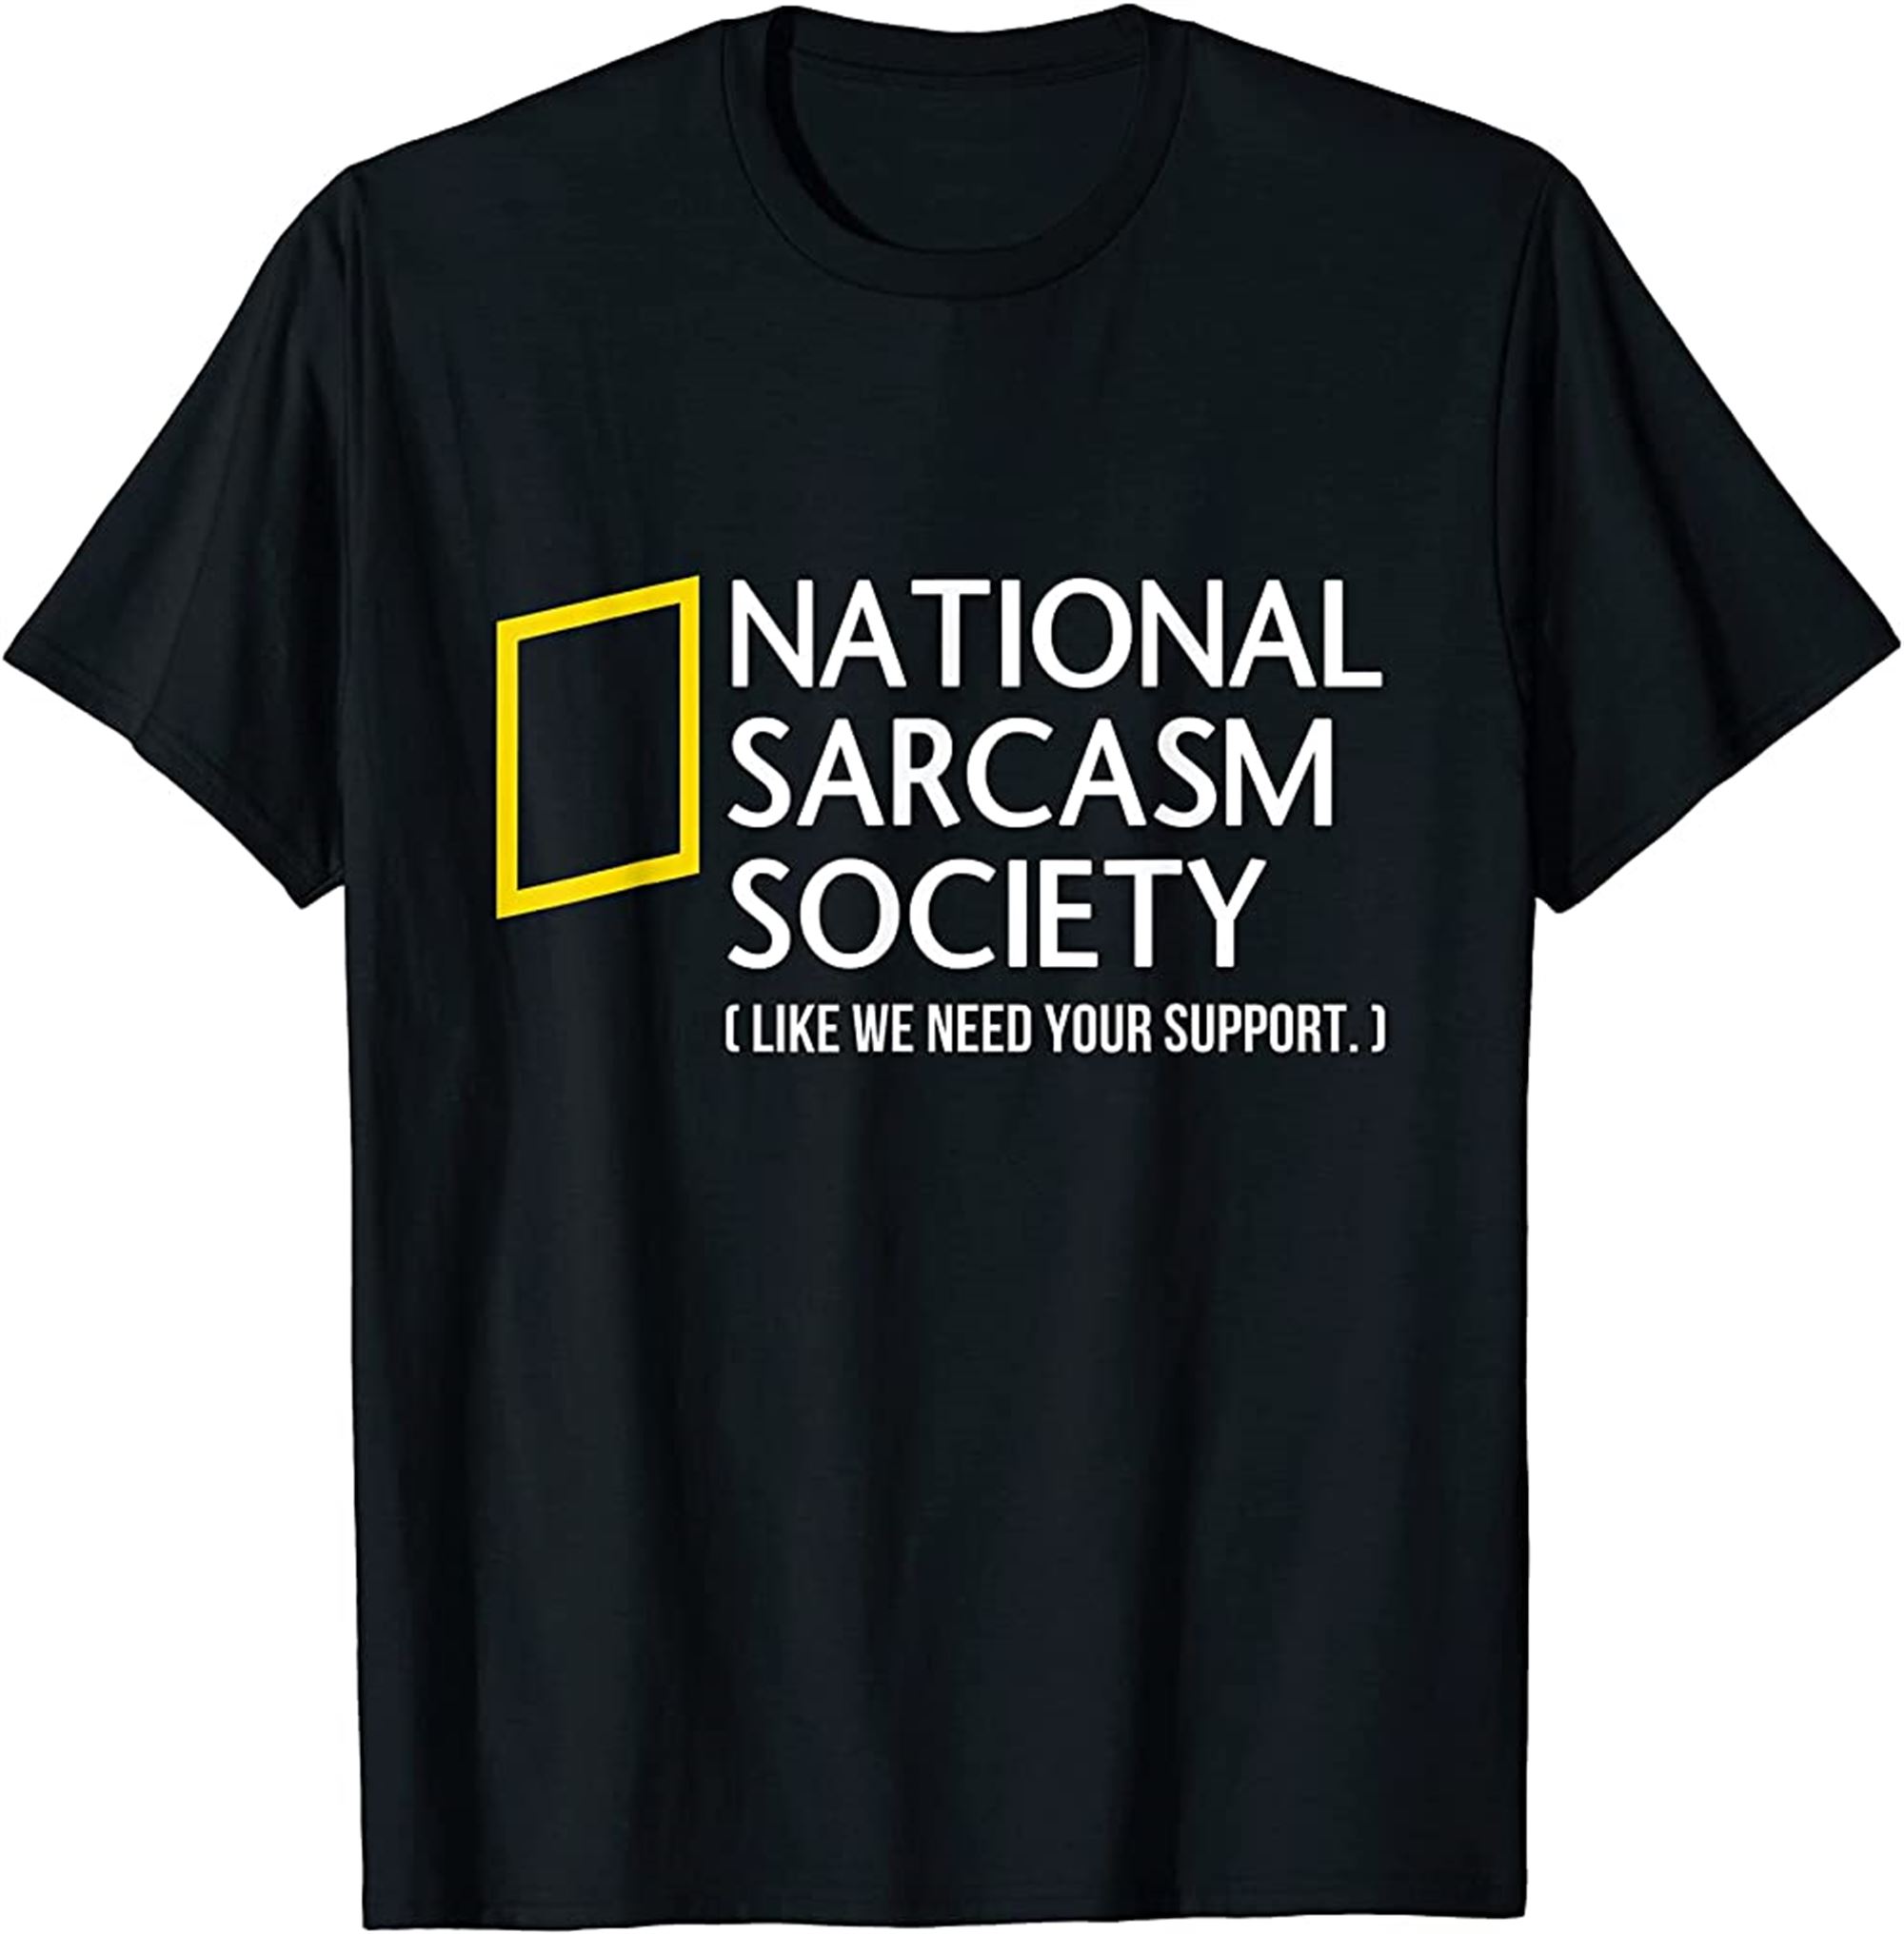 National Sarcasm Society Like We Need Your Support Tshirt Tshirt Full Size Up To 5xl